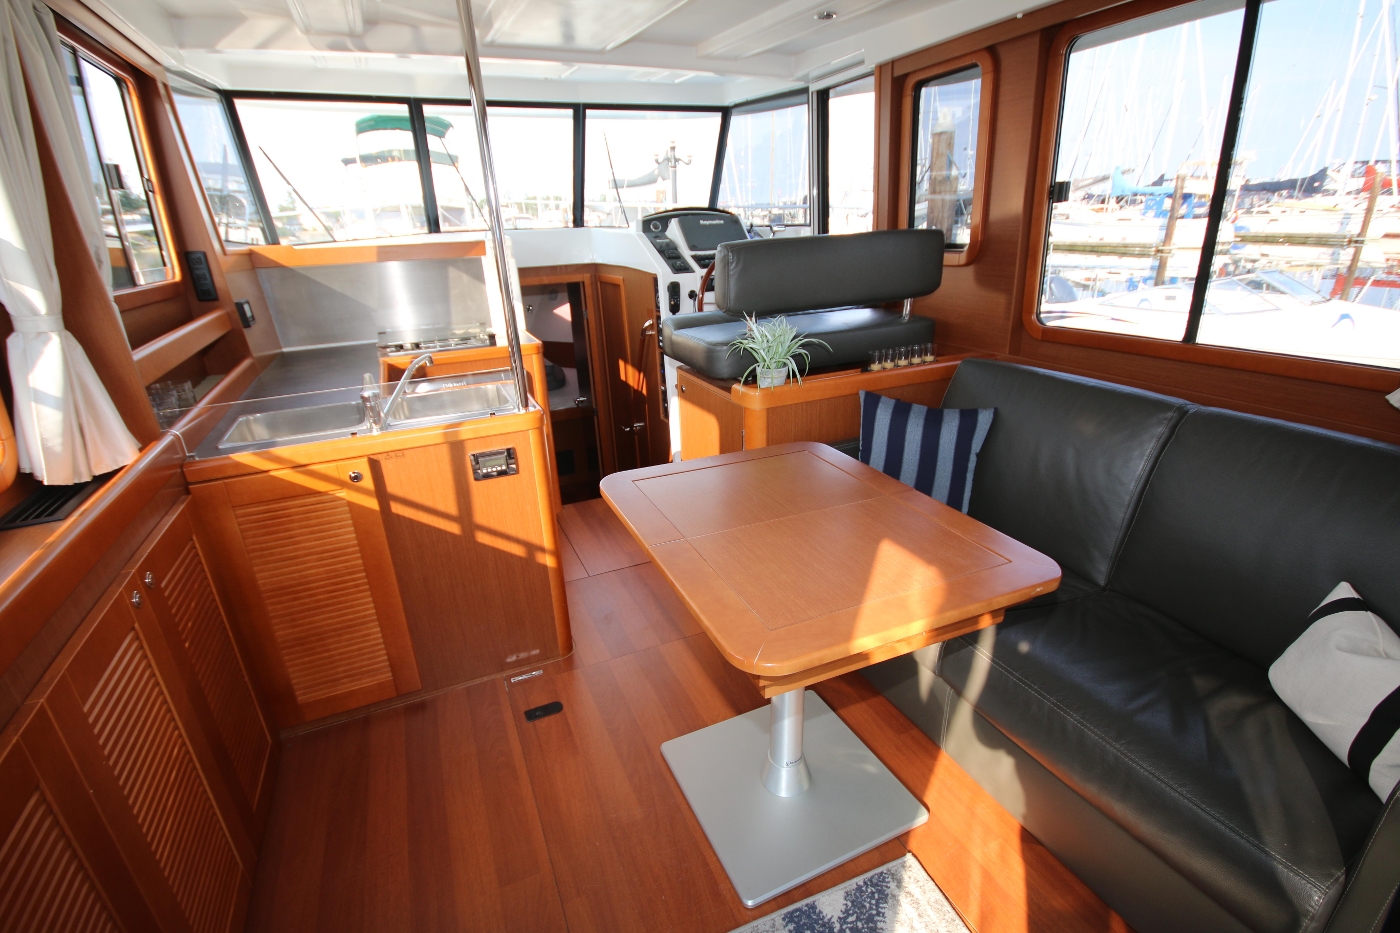 Beneteau Swift Trawler 34 2014 in Sidney, BC | Offered by Grand Yachts